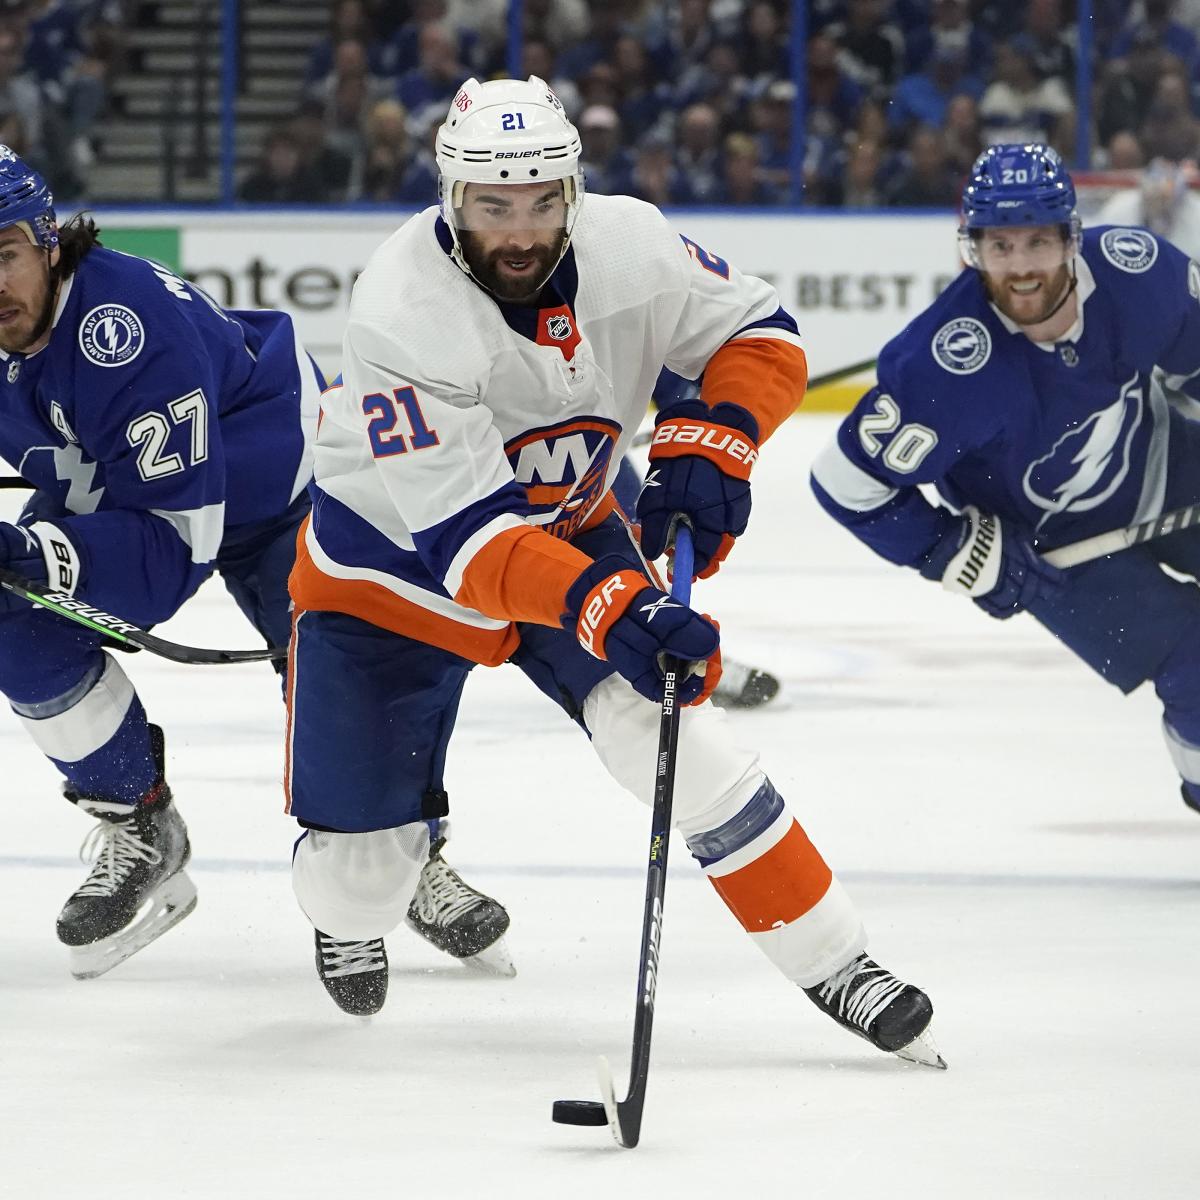 NHL Free Agency 2021 Rumors and Predictions Based on Offseason Buzz